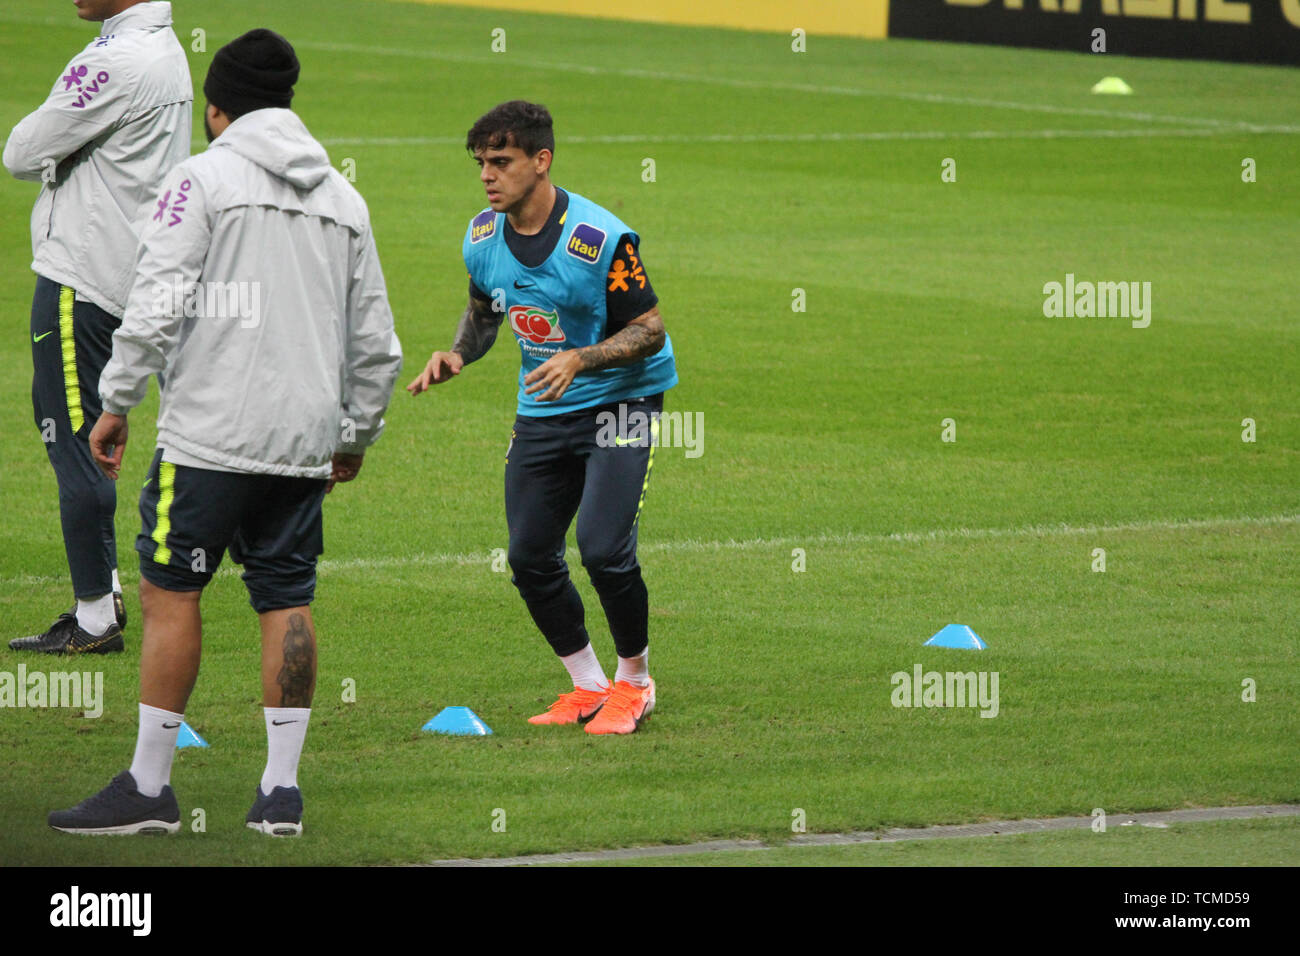 Brazil. 08th June, 2019. The Brazilian Soccer team during their training at Beira Rio stadium in Porto Alegre. The team plays friendly match against Honduras. Credit: Niyi Fote/Pacific Press/Alamy Live News Stock Photo